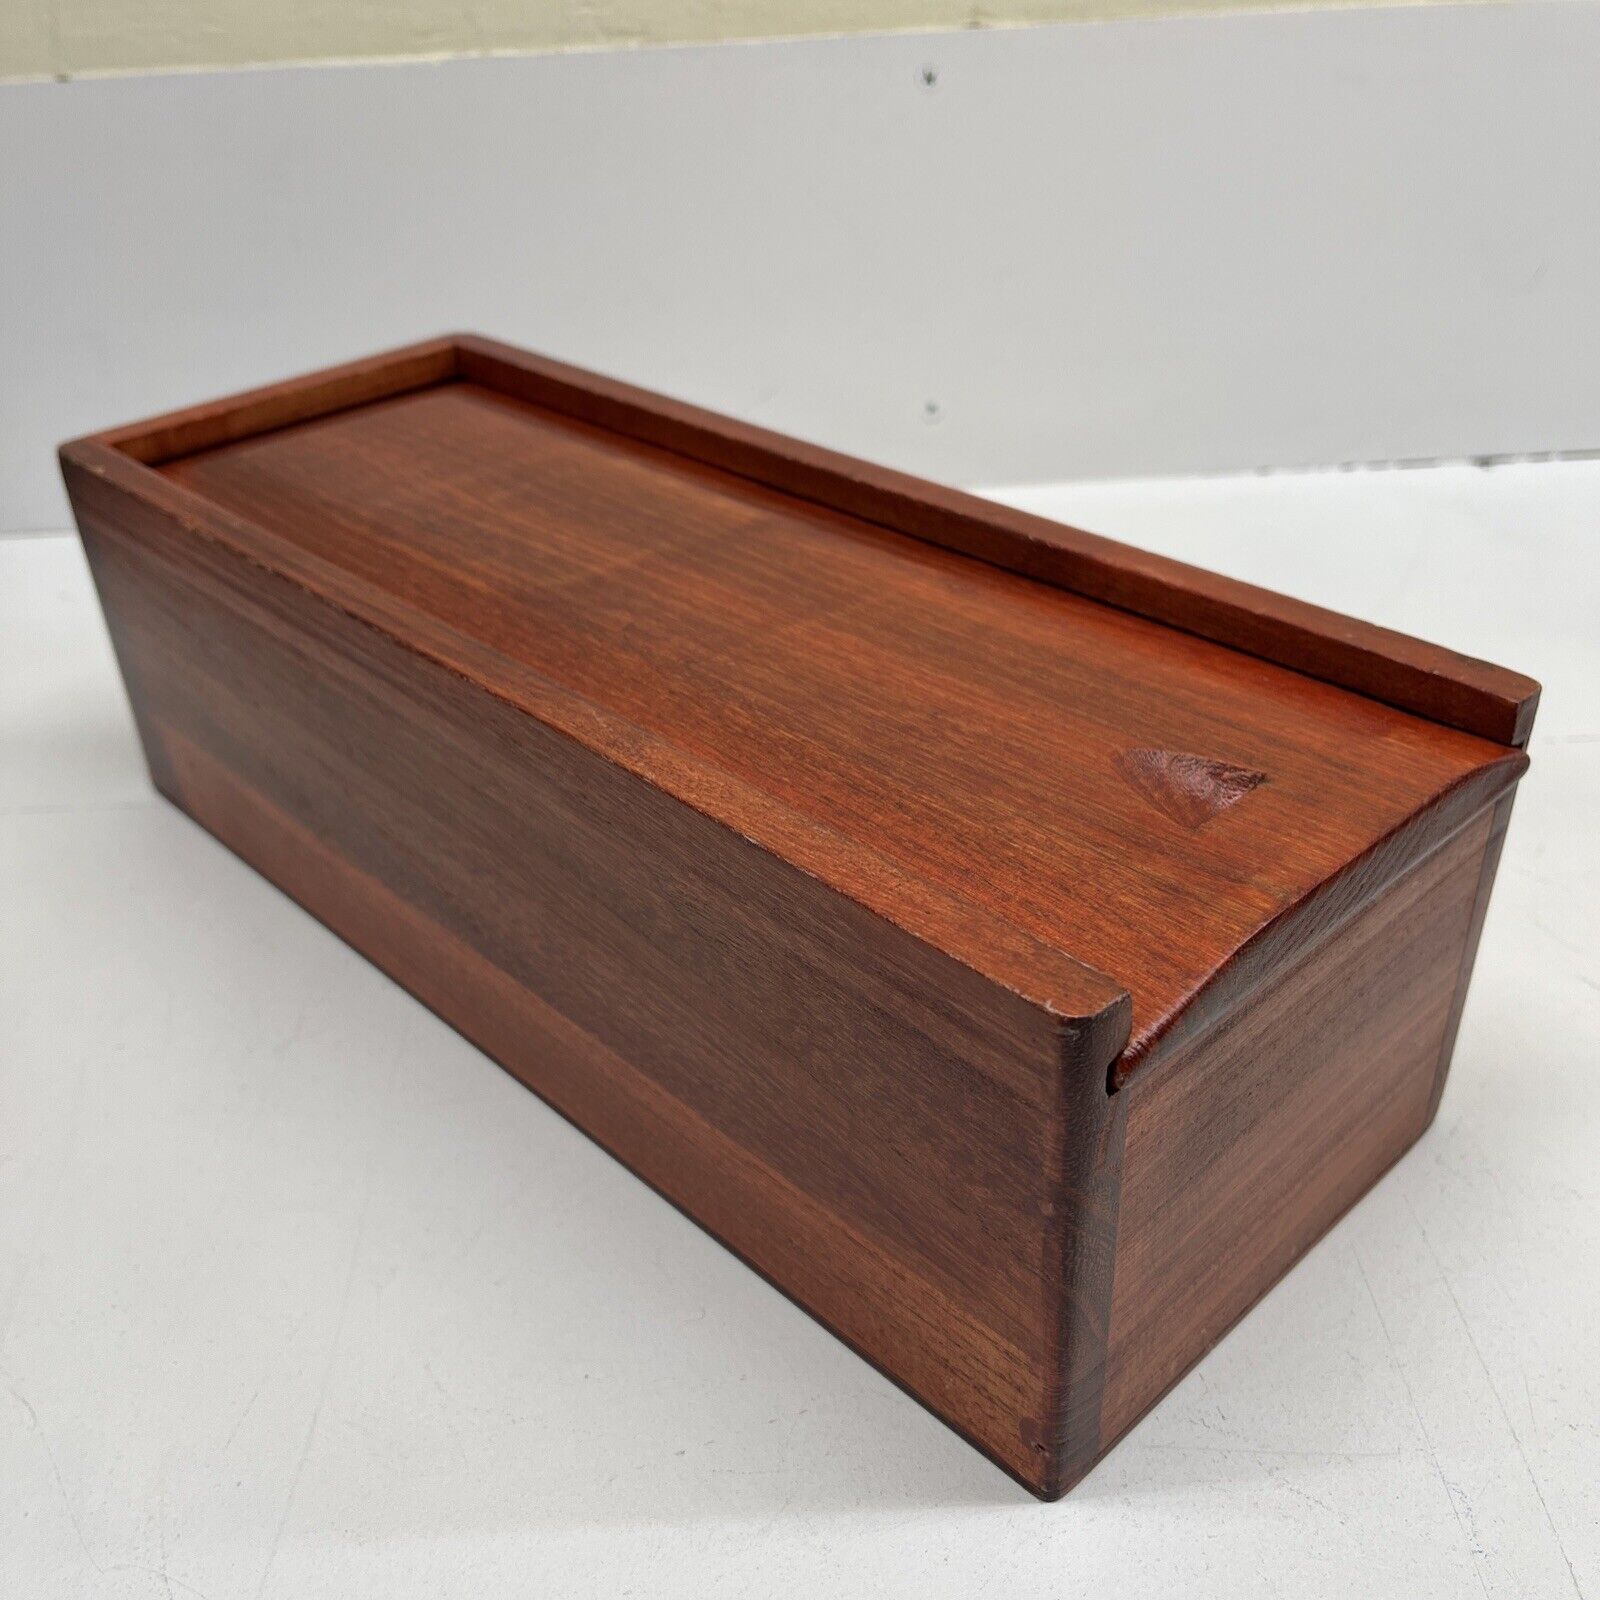 Vintage Wooden Candle Box with Sliding Lid Mahogany